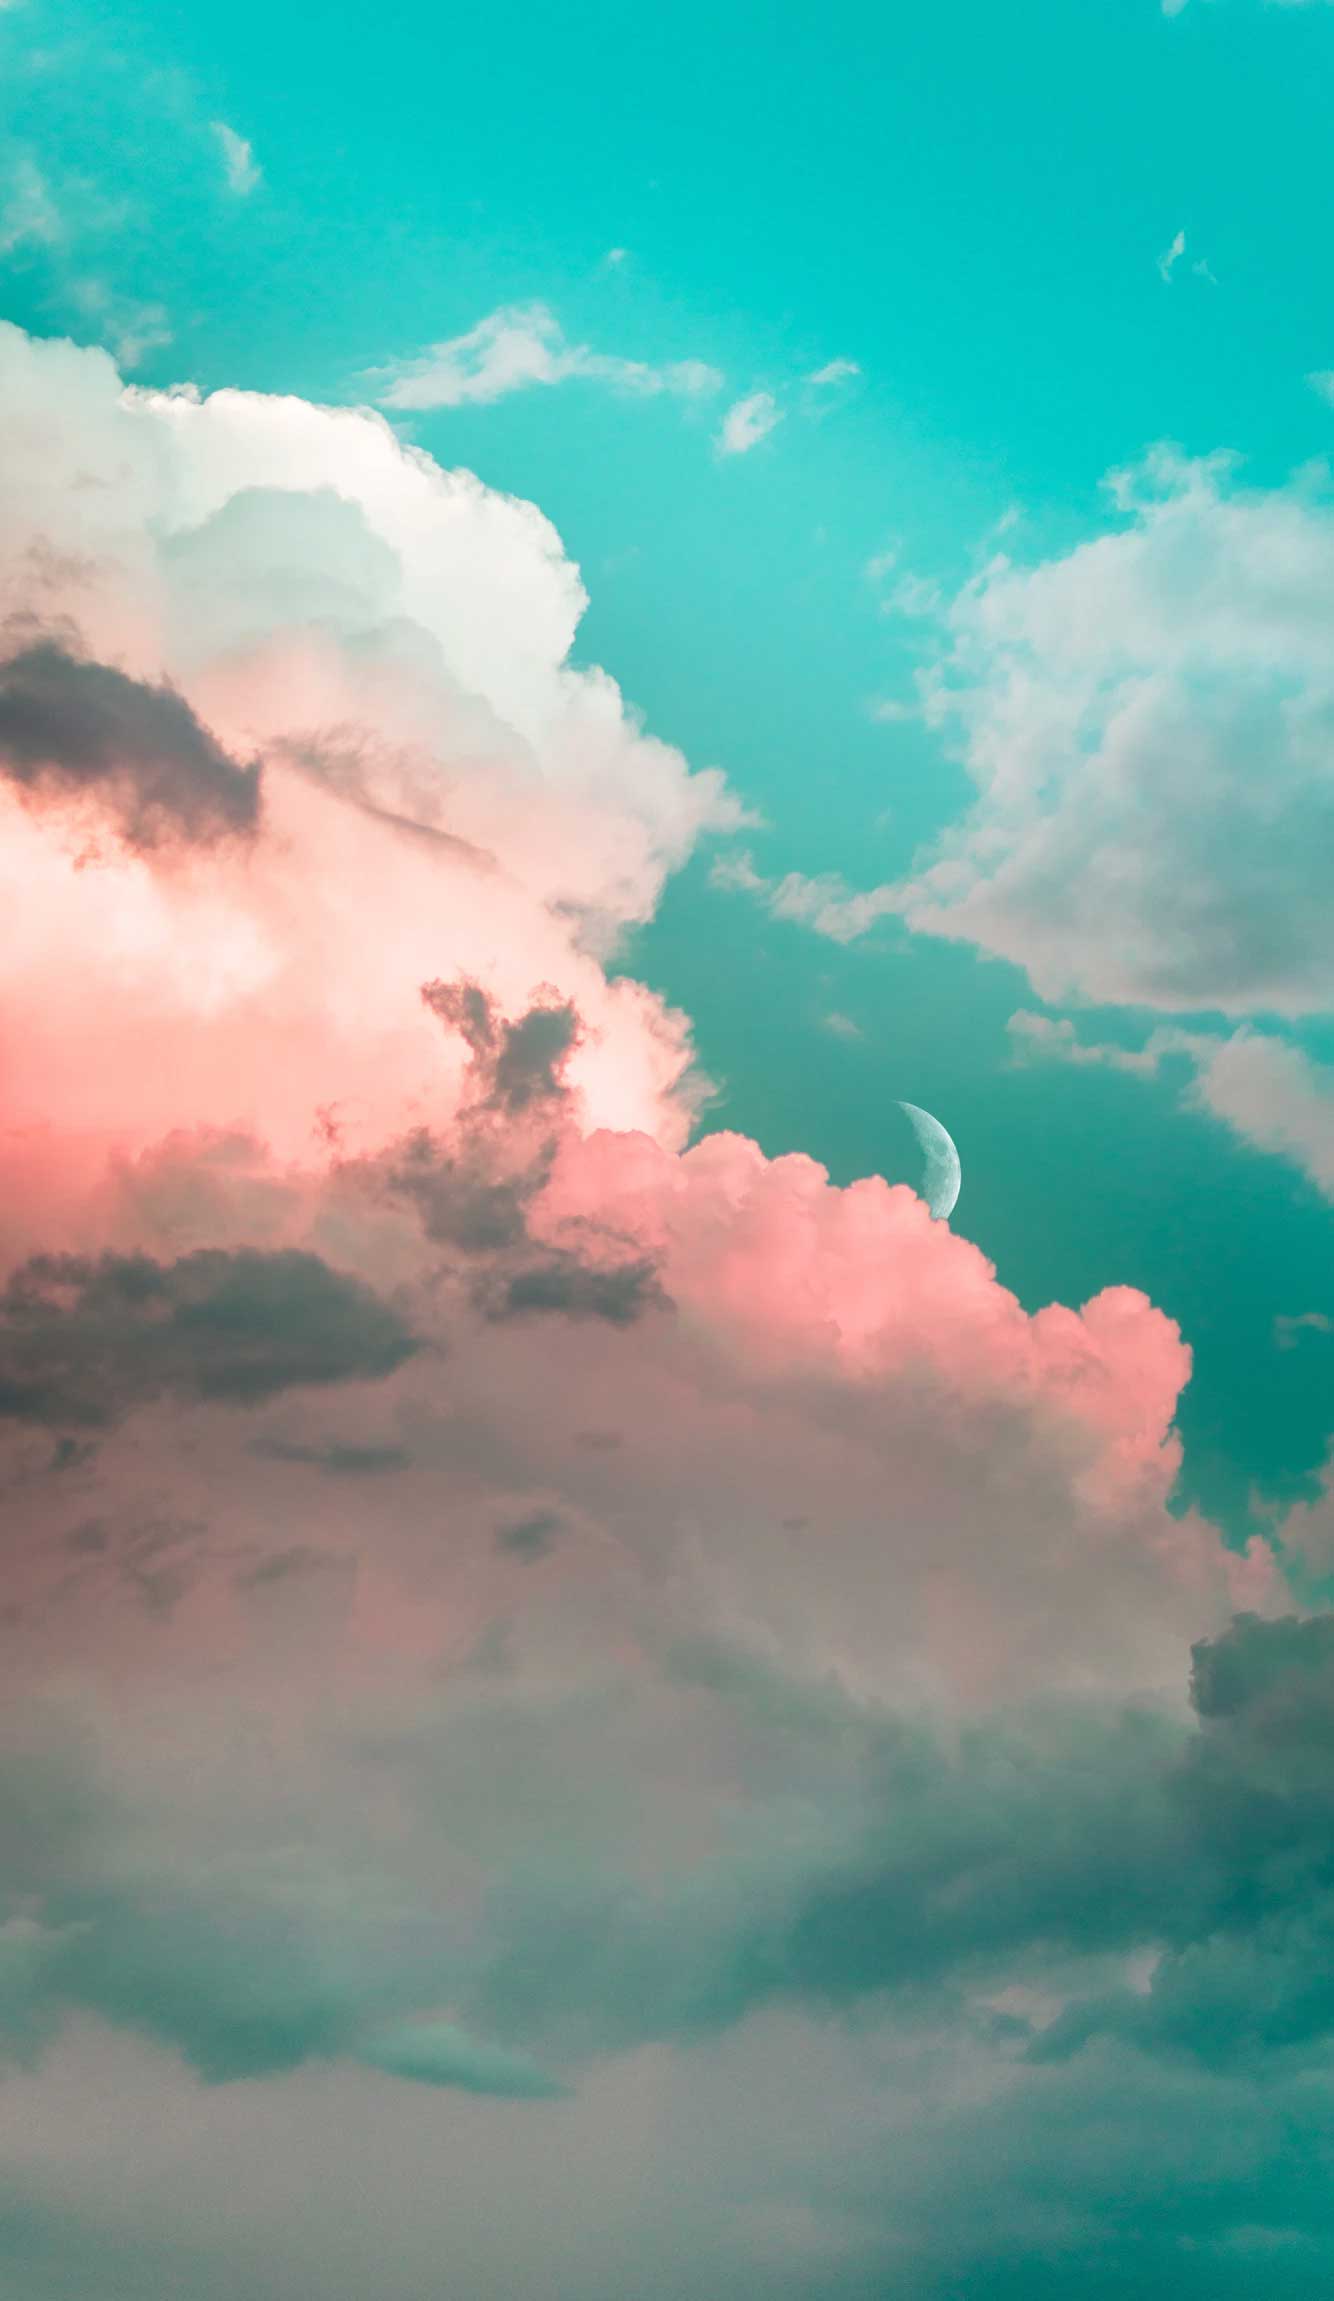 A plane flying through the clouds in front of an orange and pink sunset - Turquoise